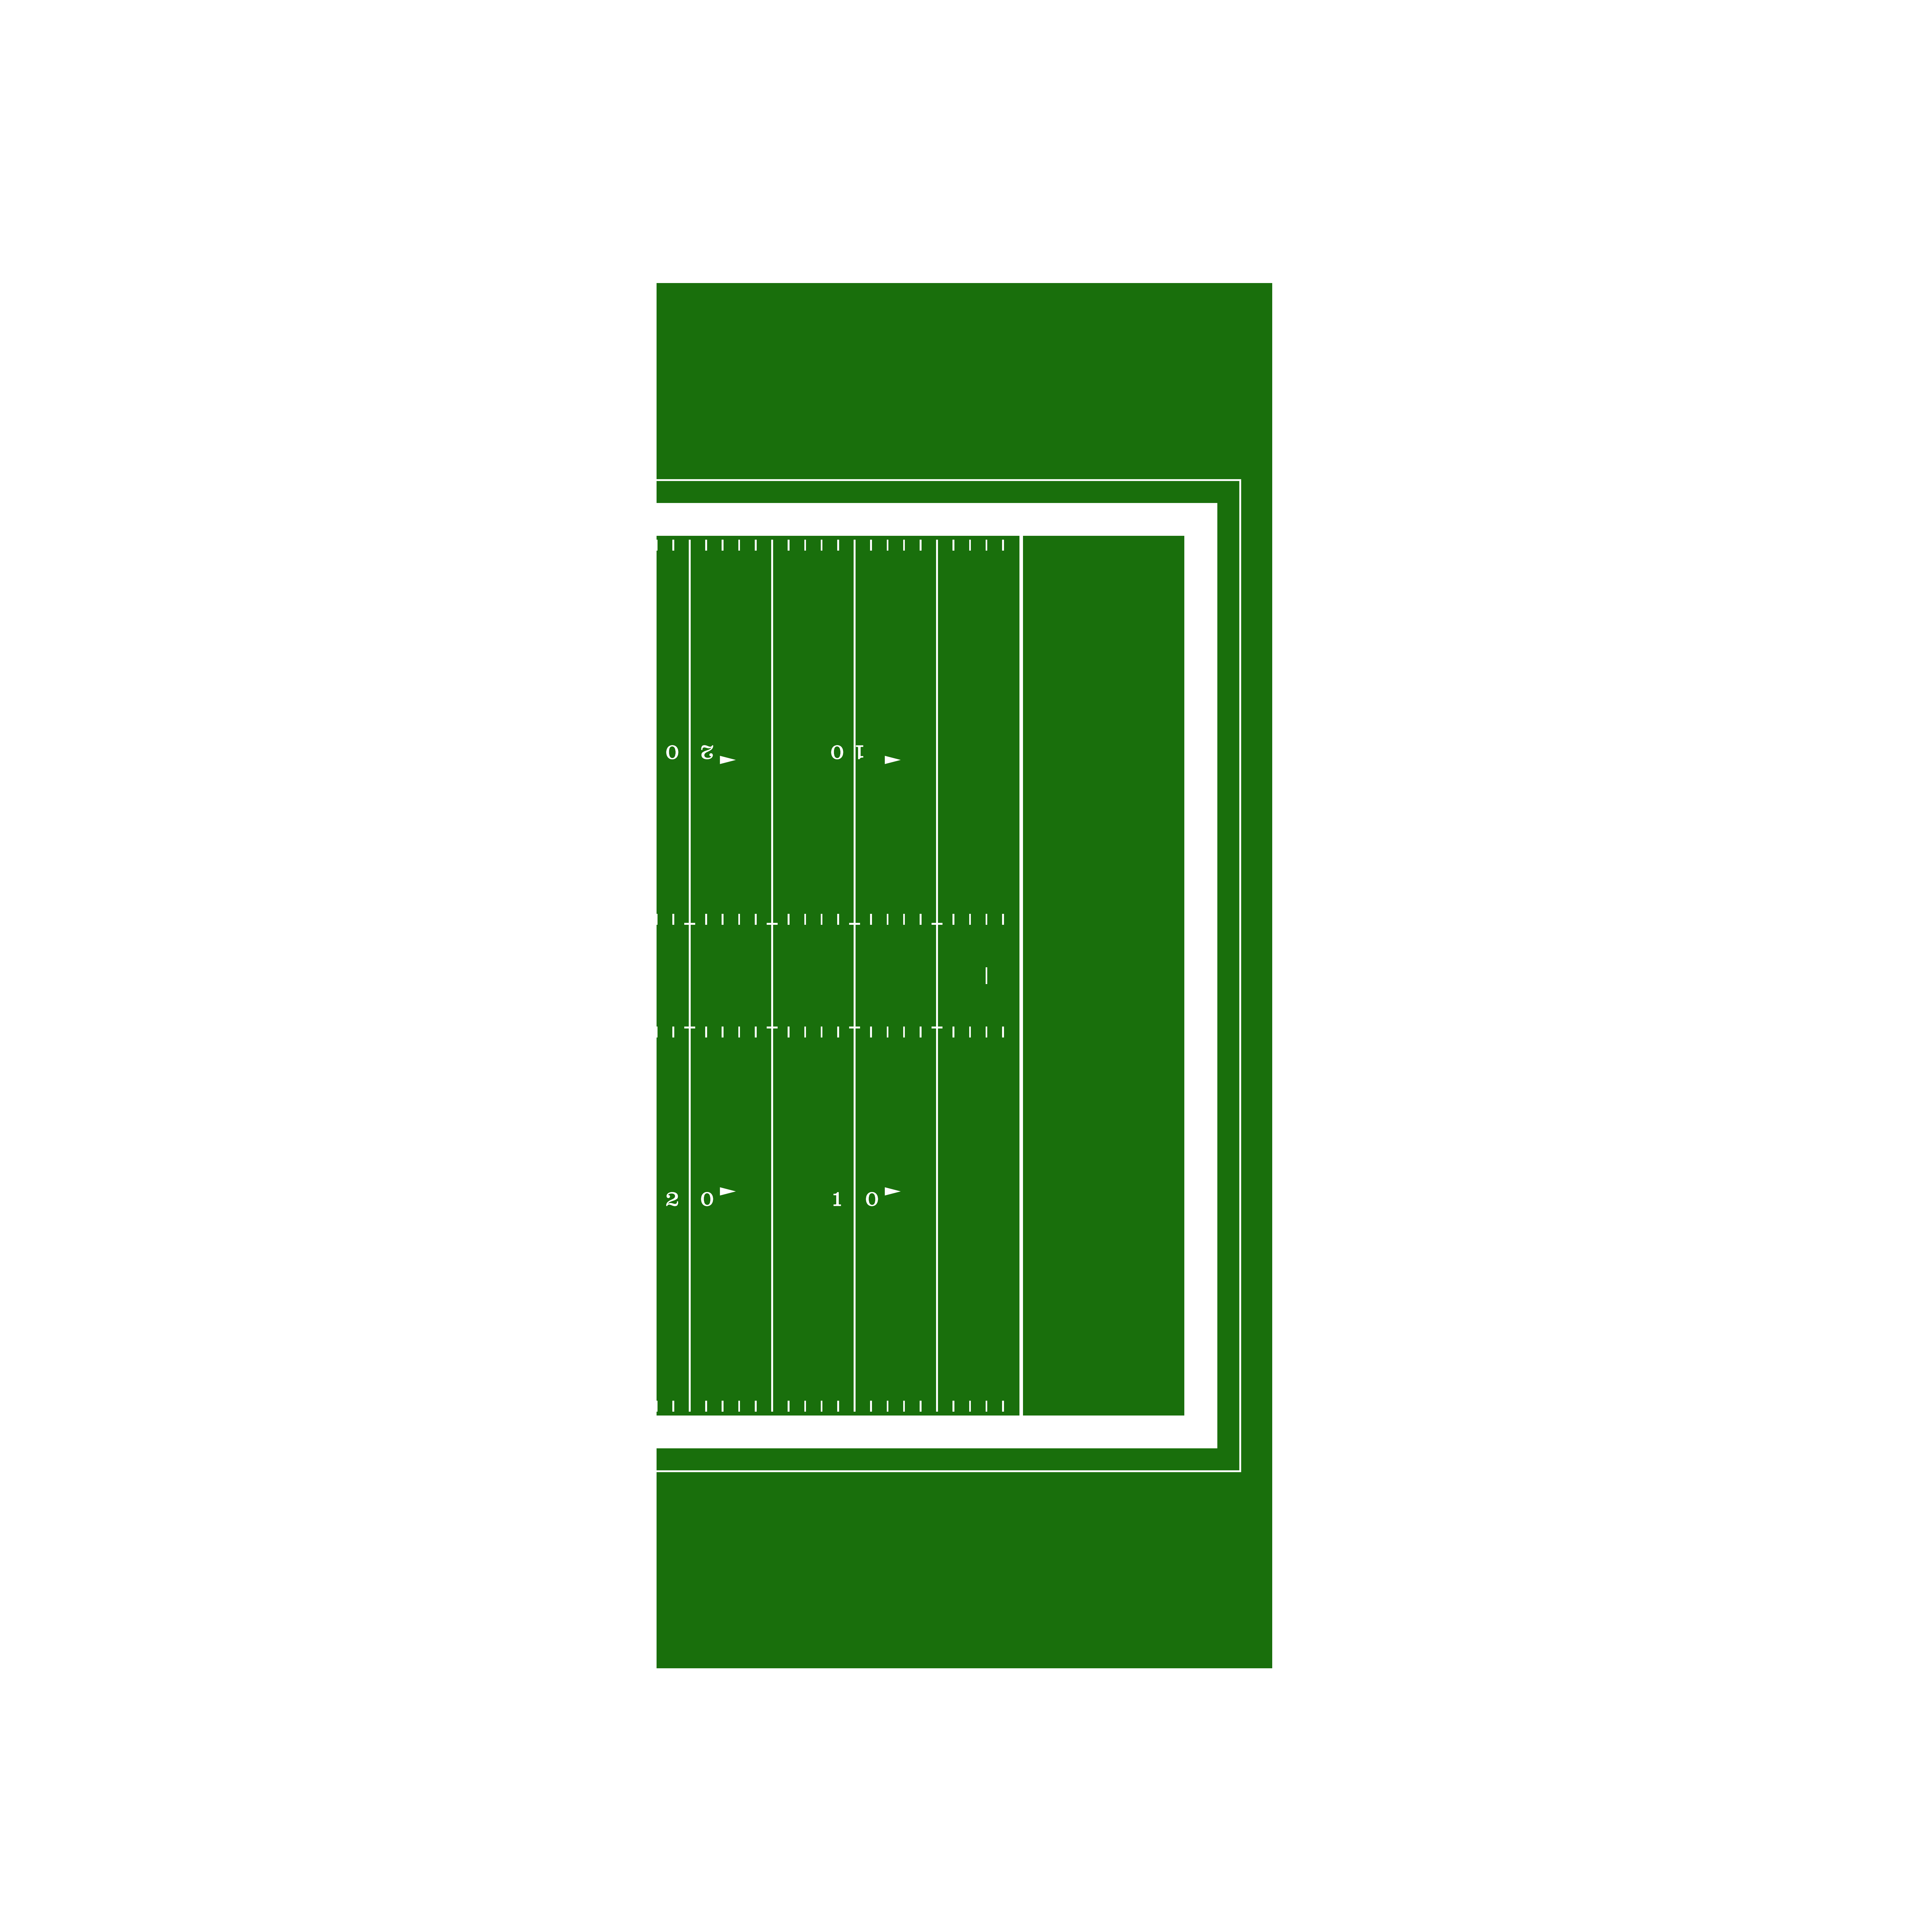 Red zone rendered from NFL Field